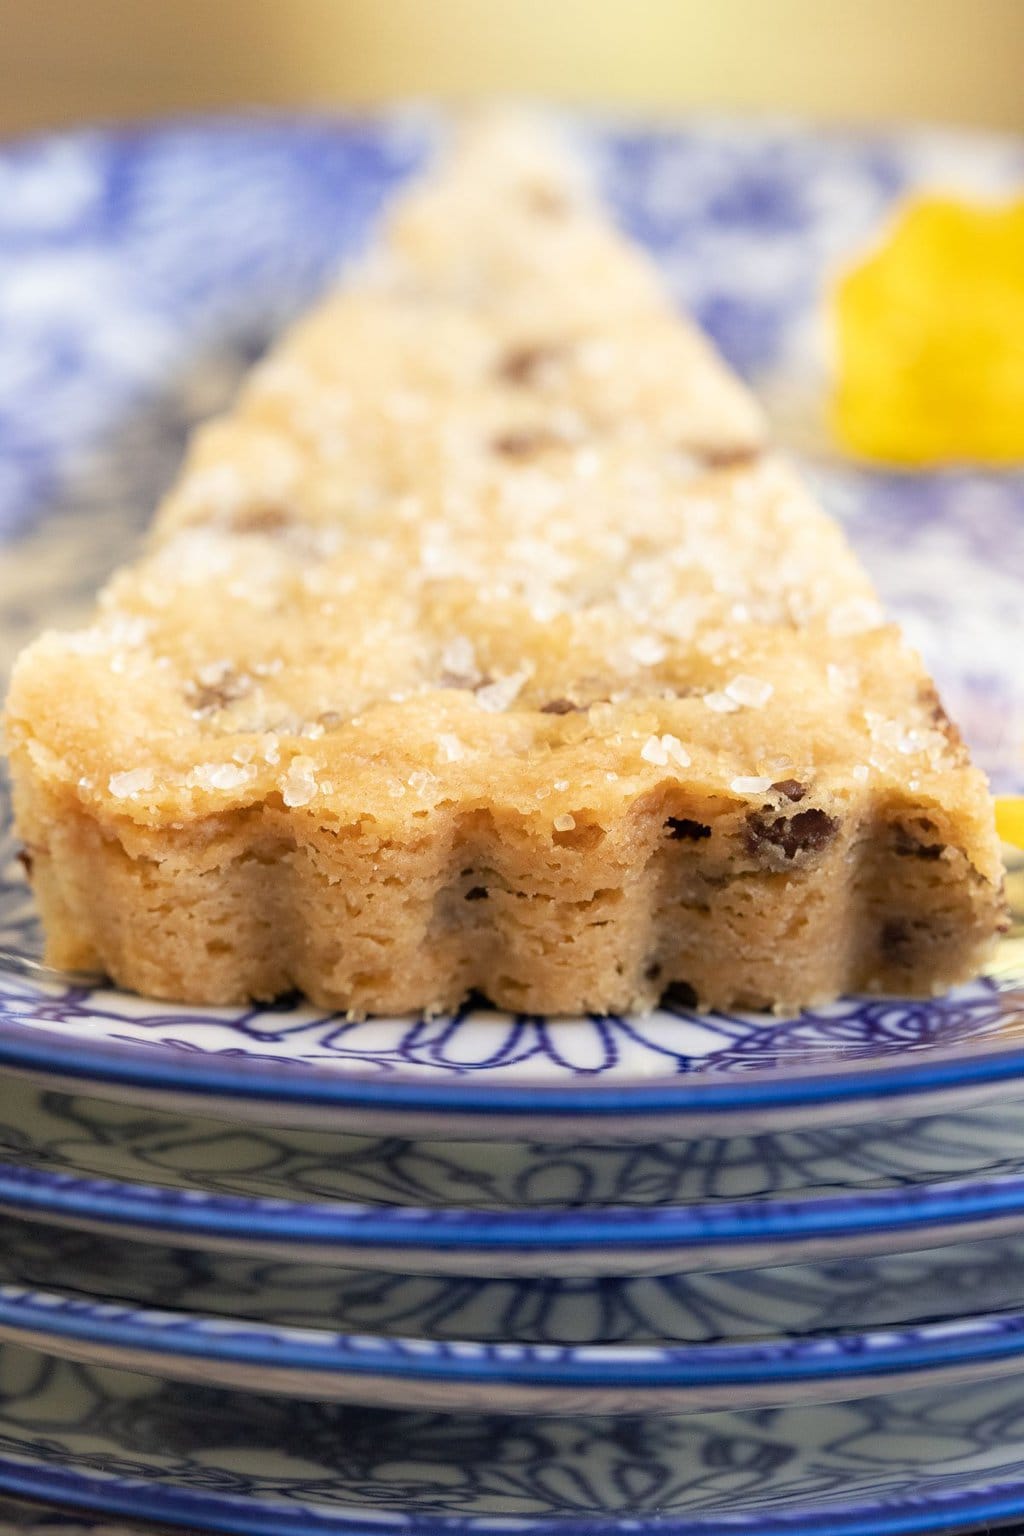 Extreme vertical closeup photo of a wedge of Ridiculously Easy Chocolate Chip Shortbread on a blue and white patterned serving plate.